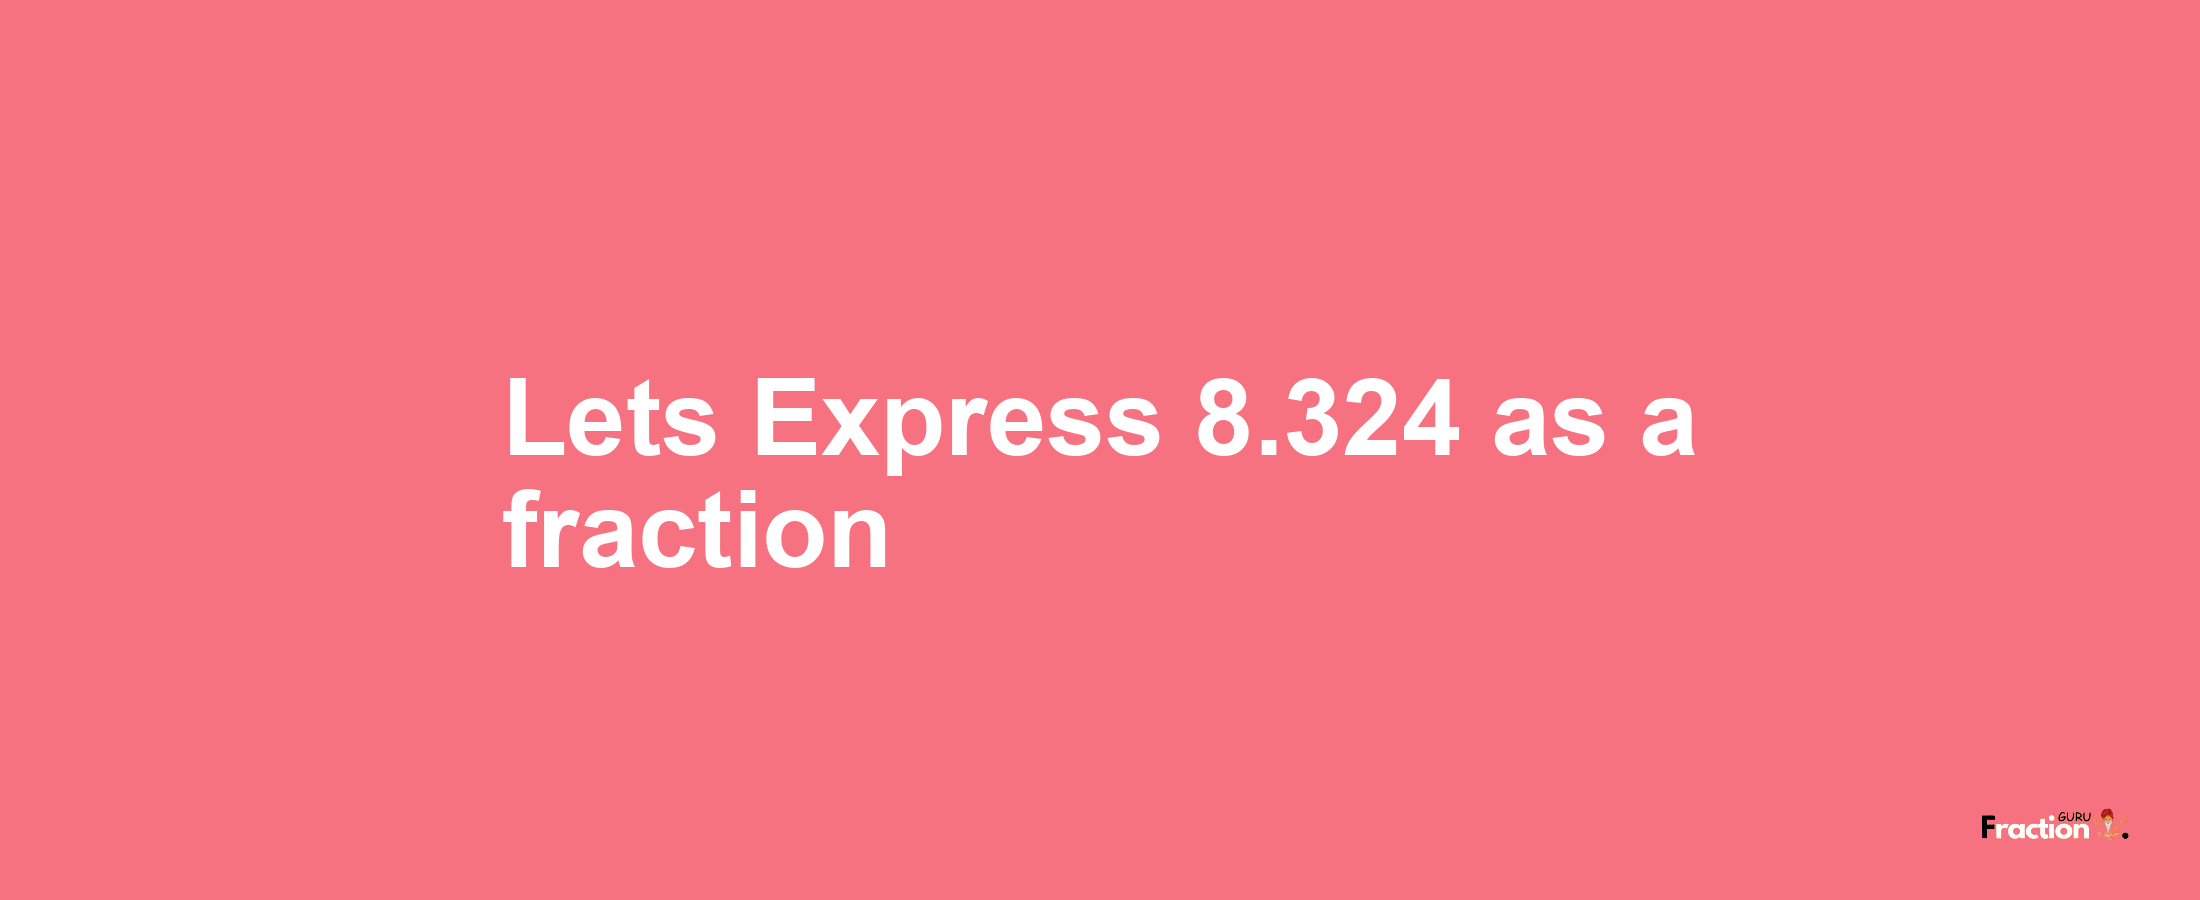 Lets Express 8.324 as afraction